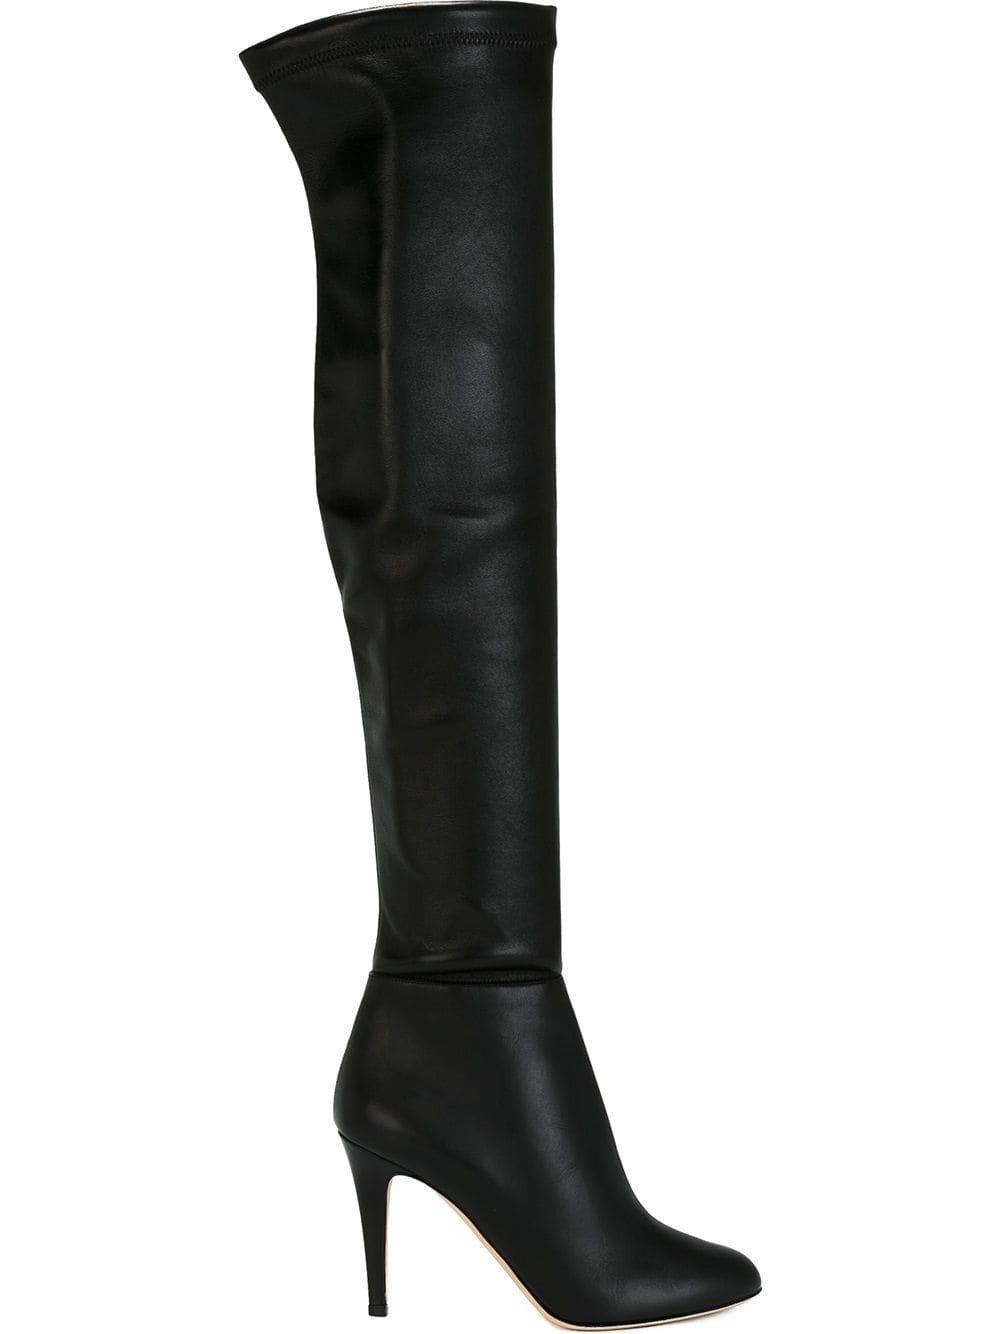 Jimmy Choo Toni Leather Over-The-Knee Boots in Black | Lyst